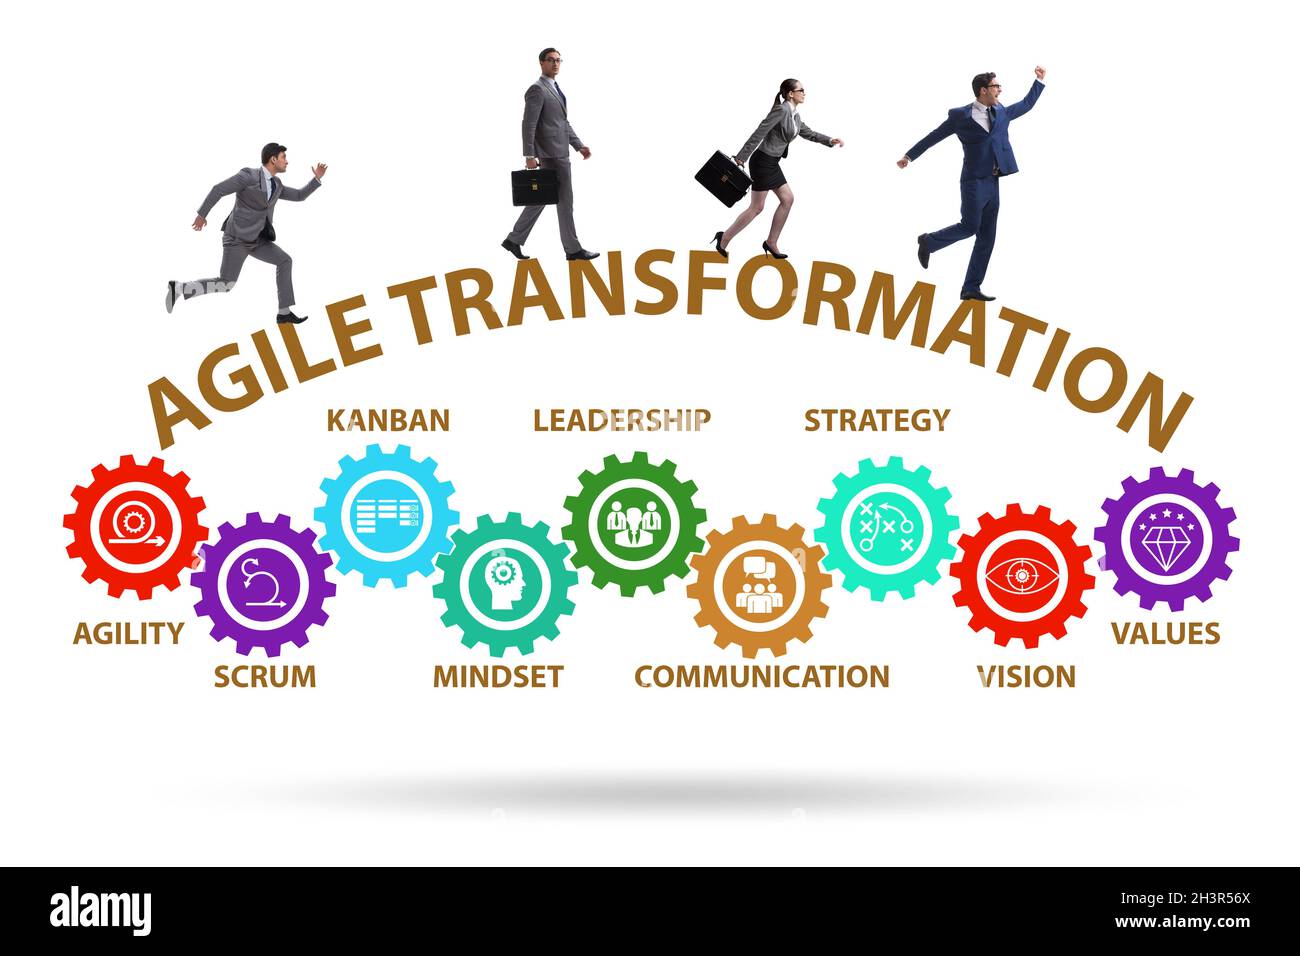 Concept of agile transformaion and reorganisation Stock Photo